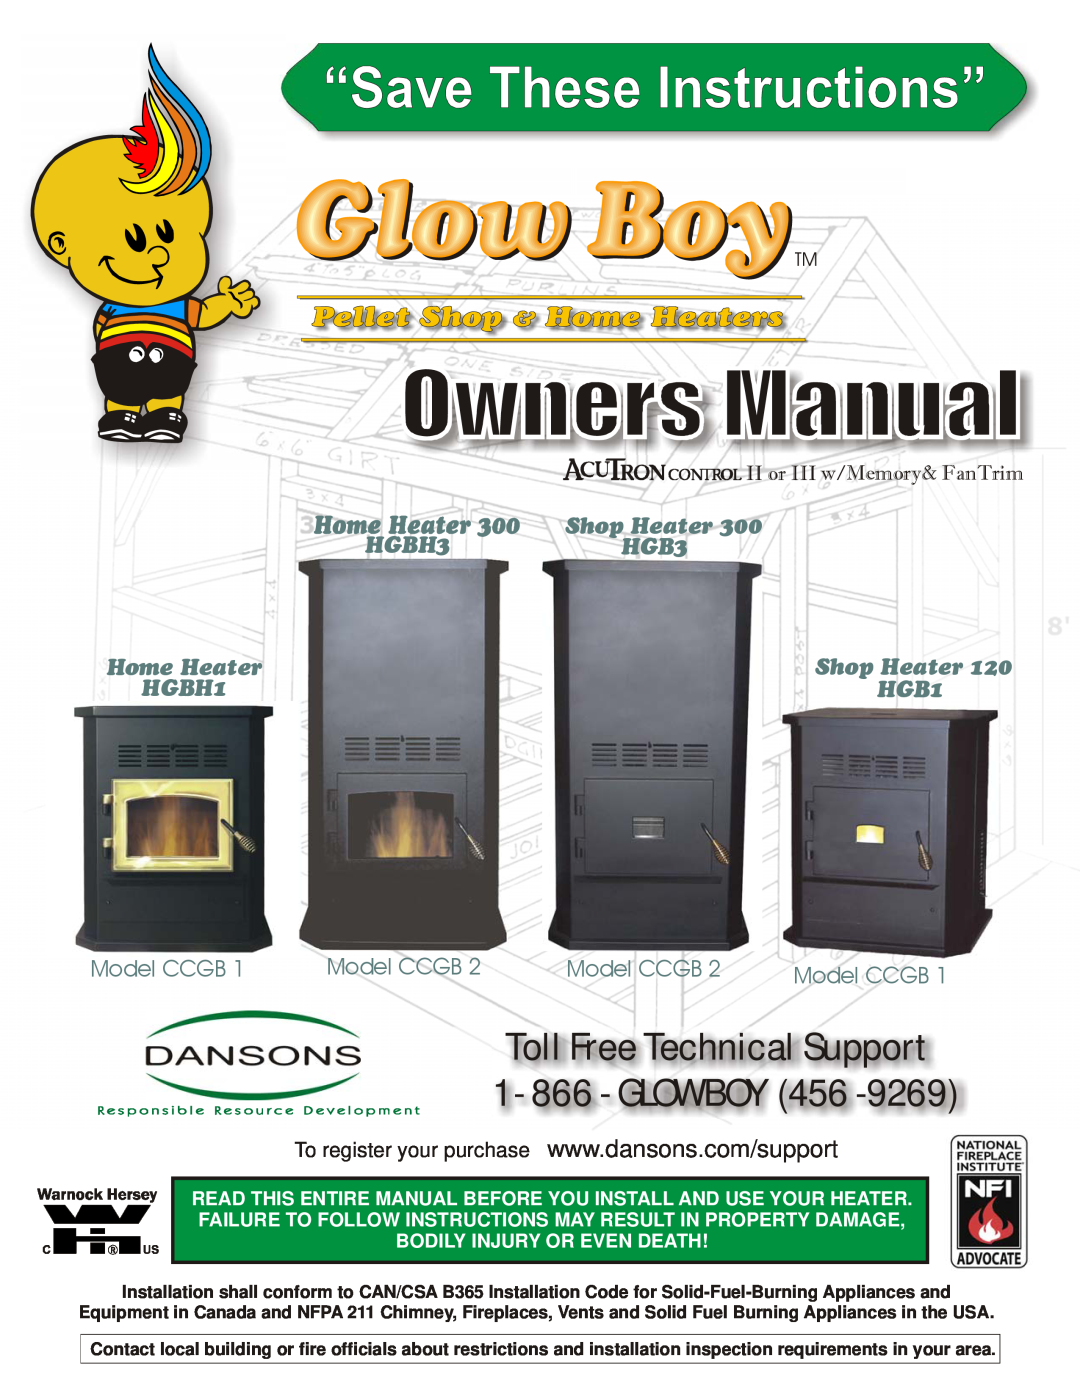 Dansons Group CCGB 1 manual Toll Free Technical Support 1 - 866 - GLOWBOY, Shop Heater HGBH3HGB3, Home Heater, HGBH1, HGB1 